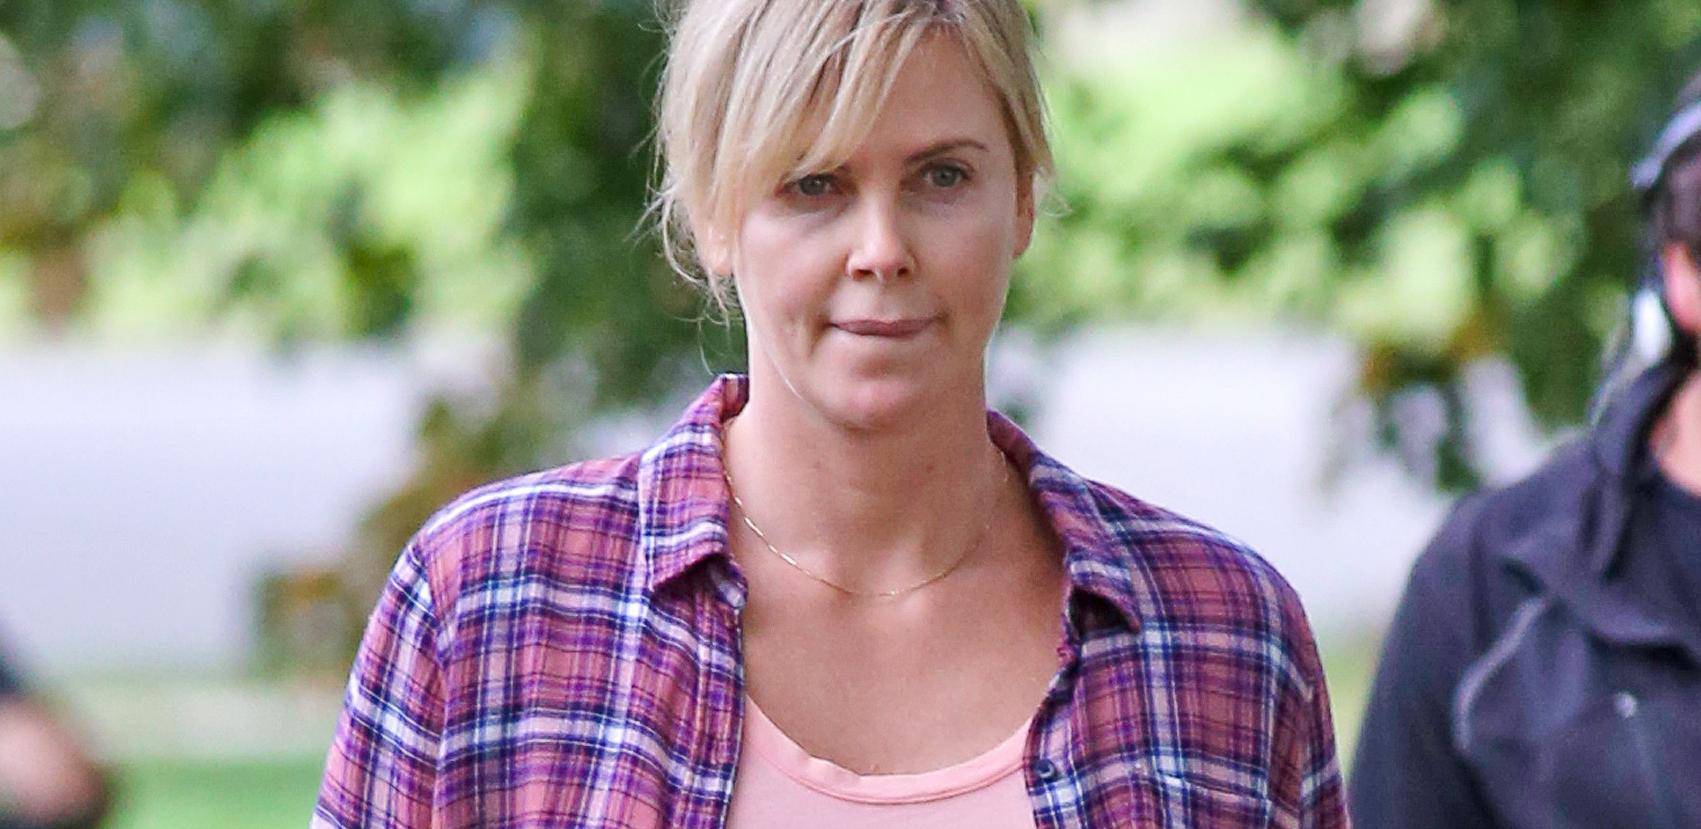 Charlize Theron puts her mothering skills to work while on the set of 'Tully'